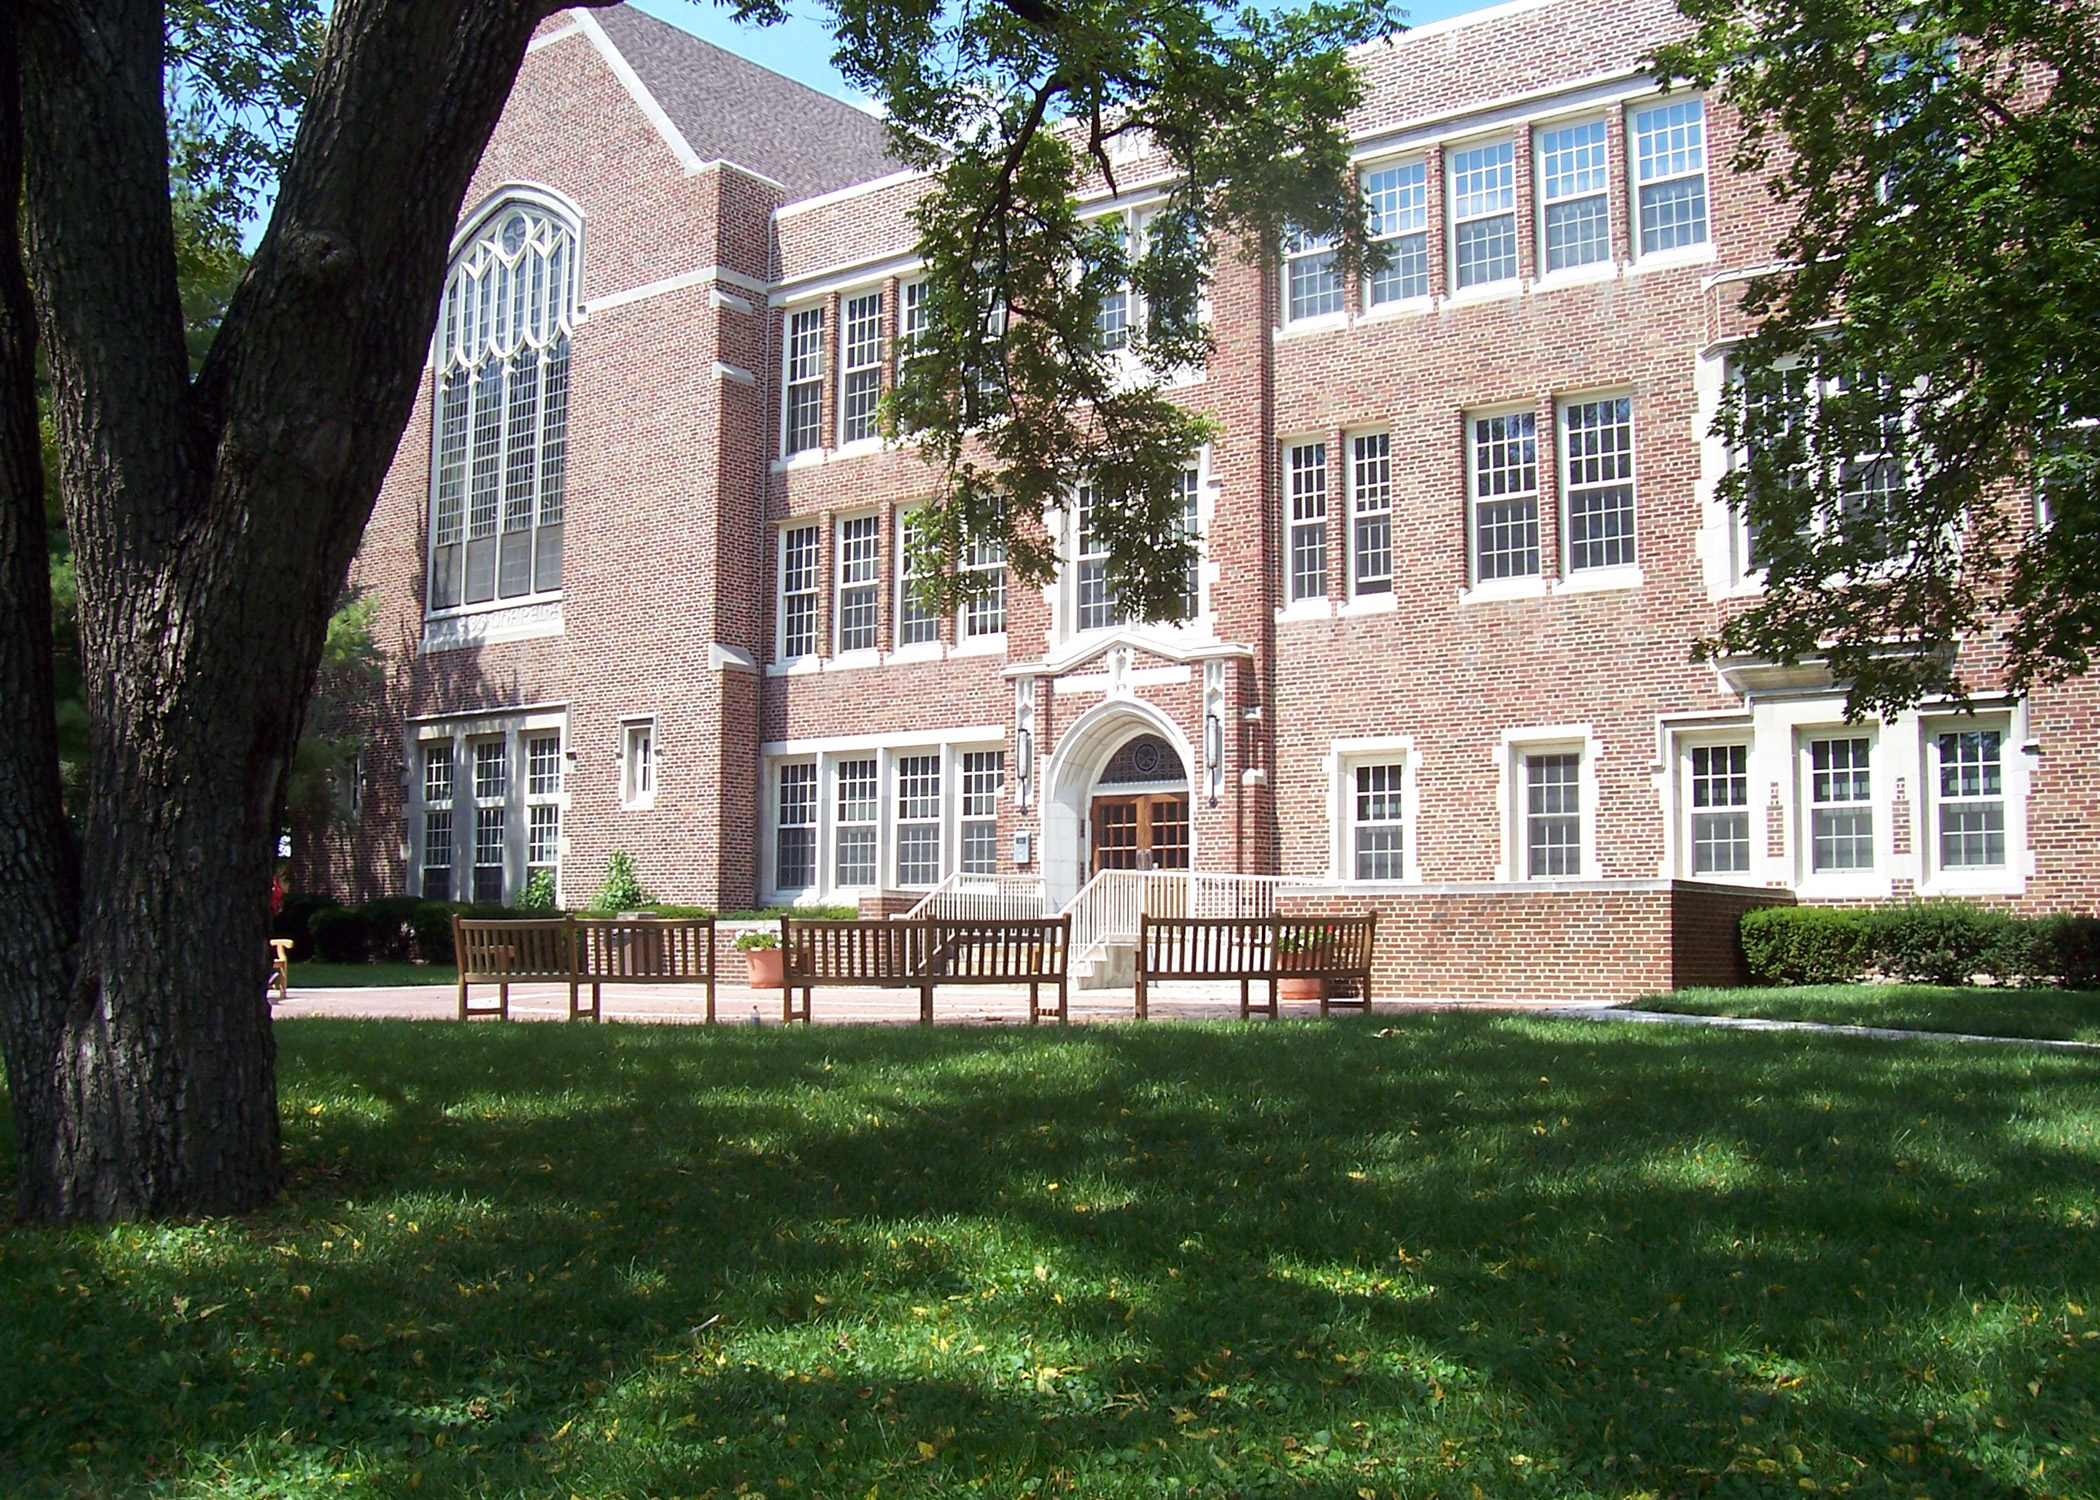 Hudson Hall at Blackburn College, home of the only student managed work program in the U.S.